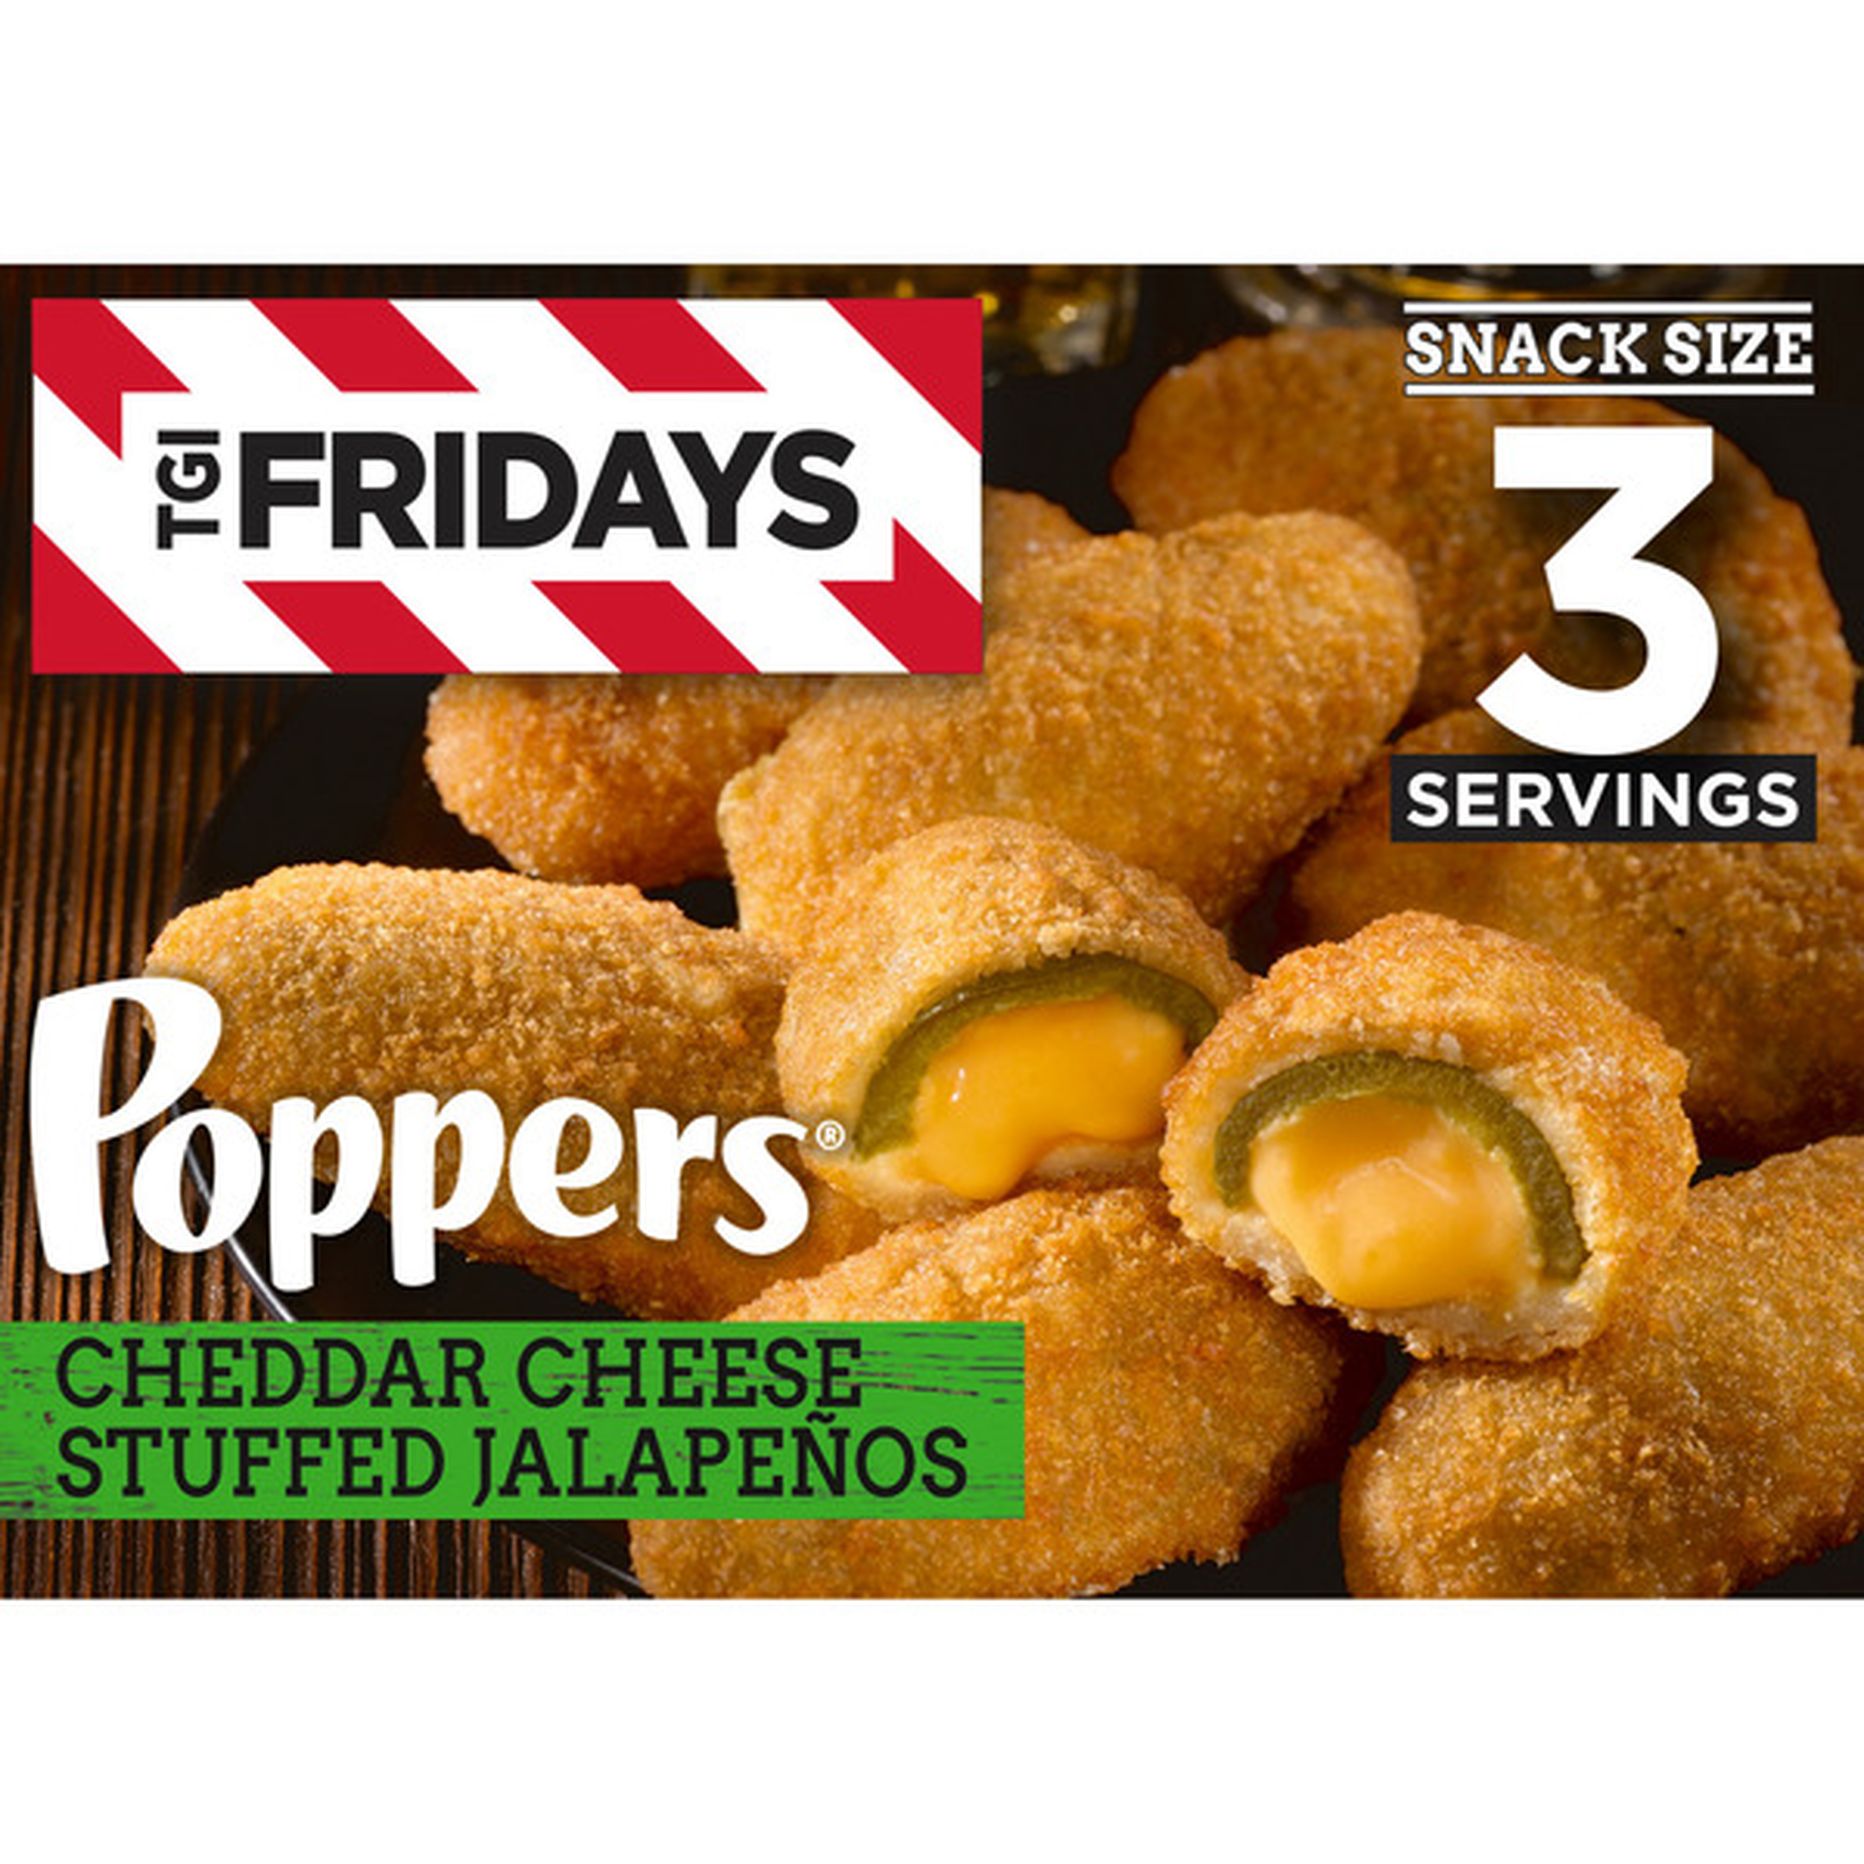 Tgi Fridays Cheddar Cheese Stuffed Jalapeno Poppers Frozen Snacks 8 Oz Delivery Or Pickup Near 